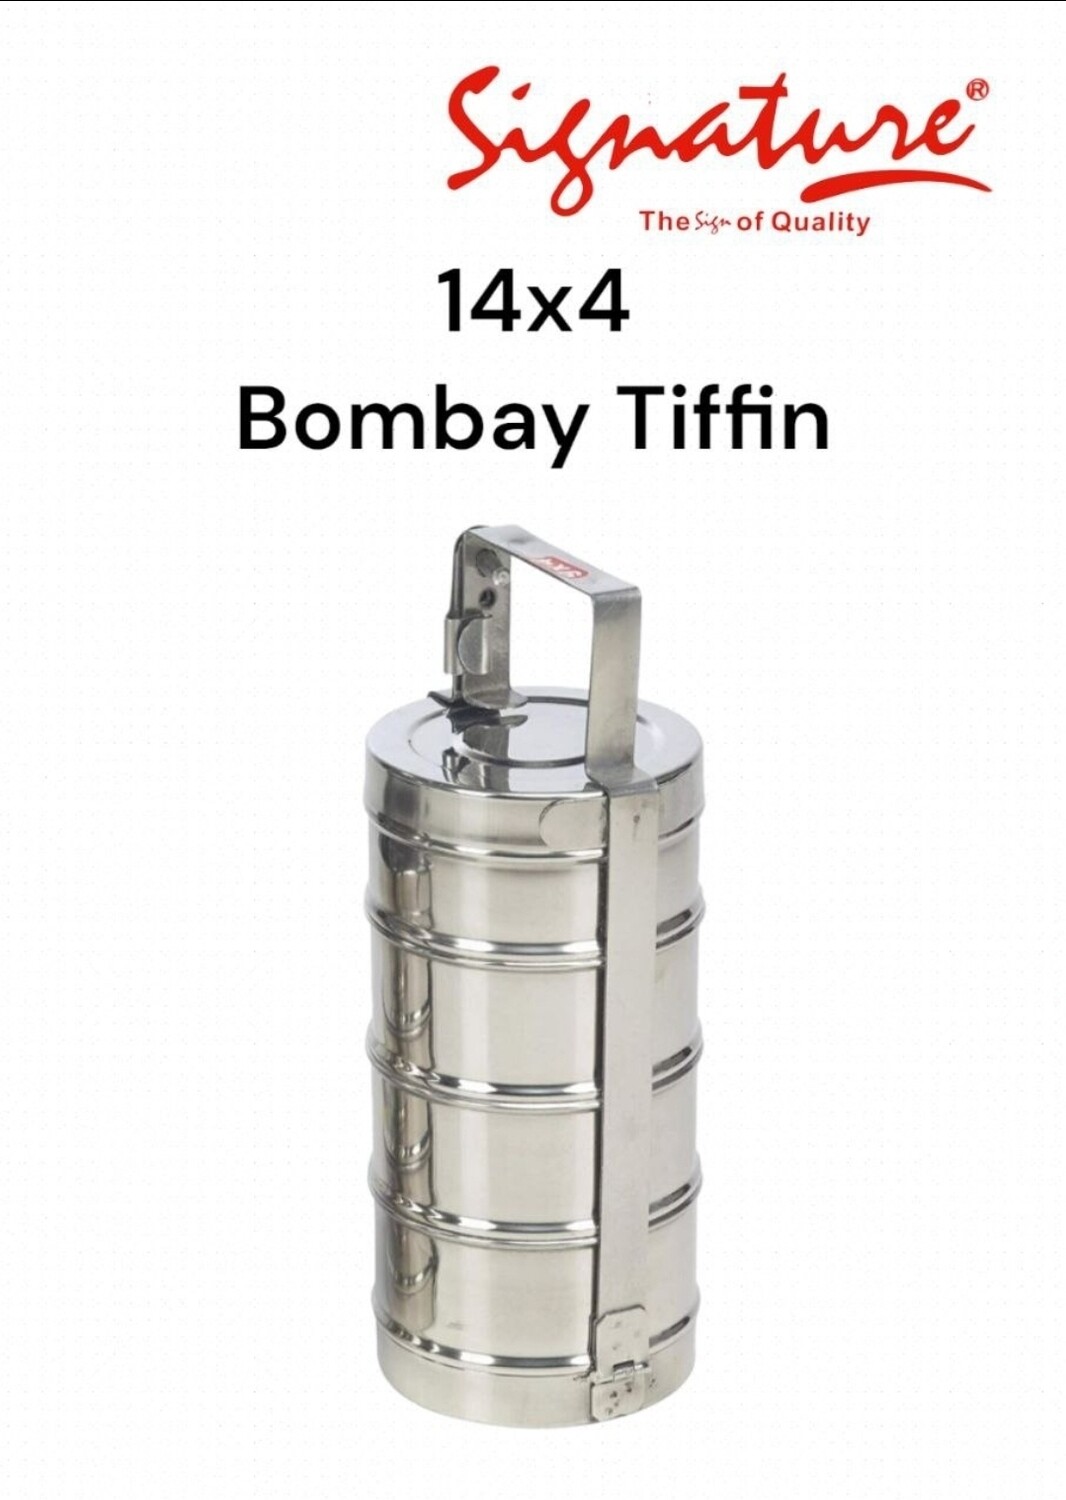 Signature Tiffin 4 compartments Stainless Steel Lunch Box (Tin Khan) Stainless Steel 4 Tier Lunch/Tiffin Box, Medium Size